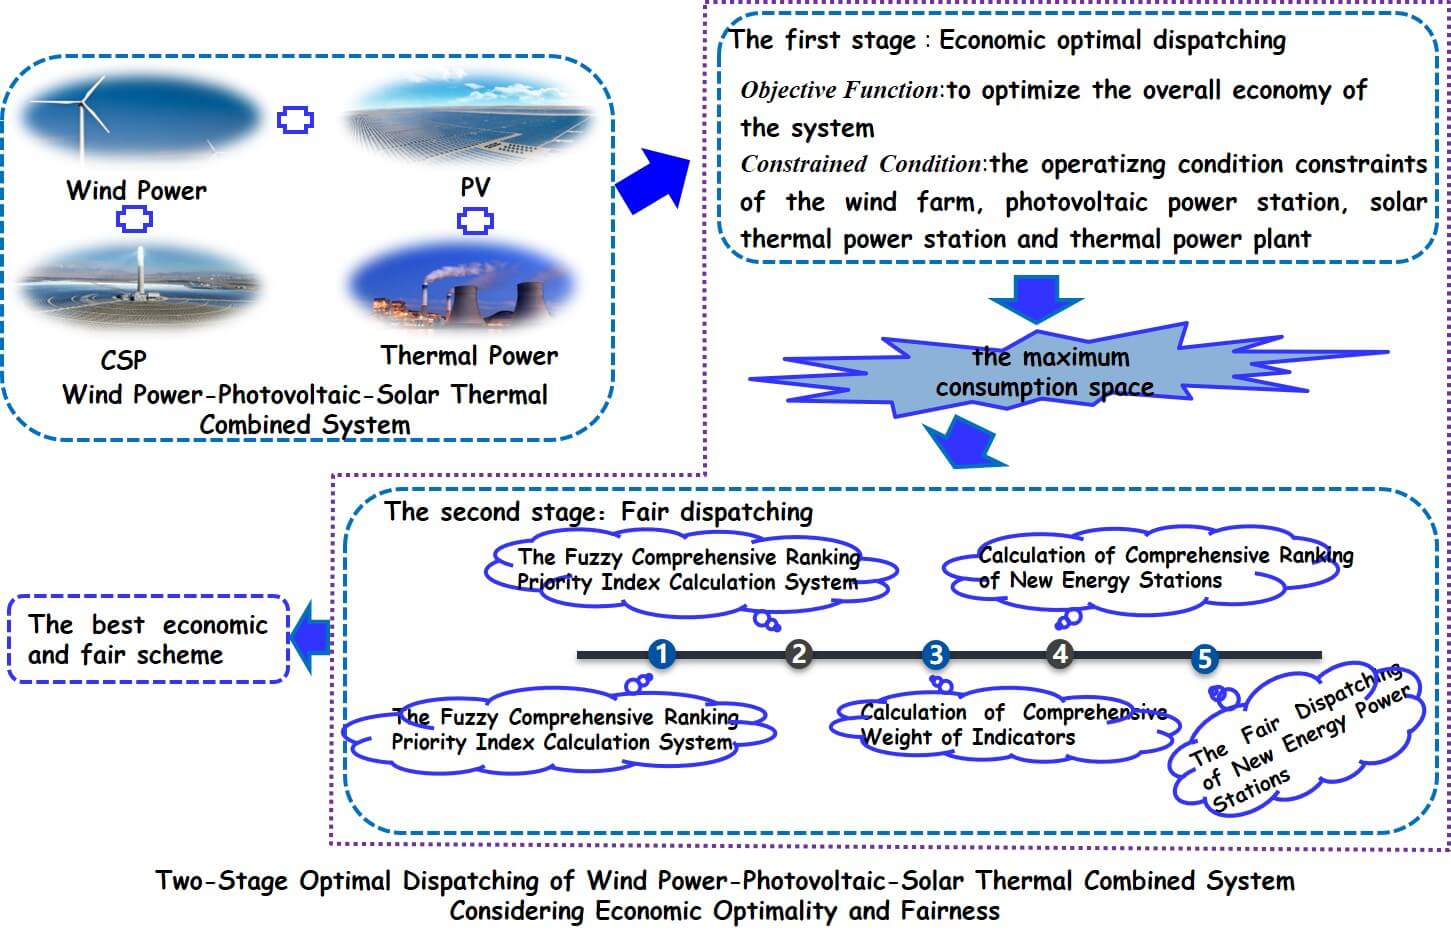 Two-Stage Optimal Dispatching of Wind Power-Photovoltaic-Solar Thermal Combined System Considering Economic Optimality and Fairness